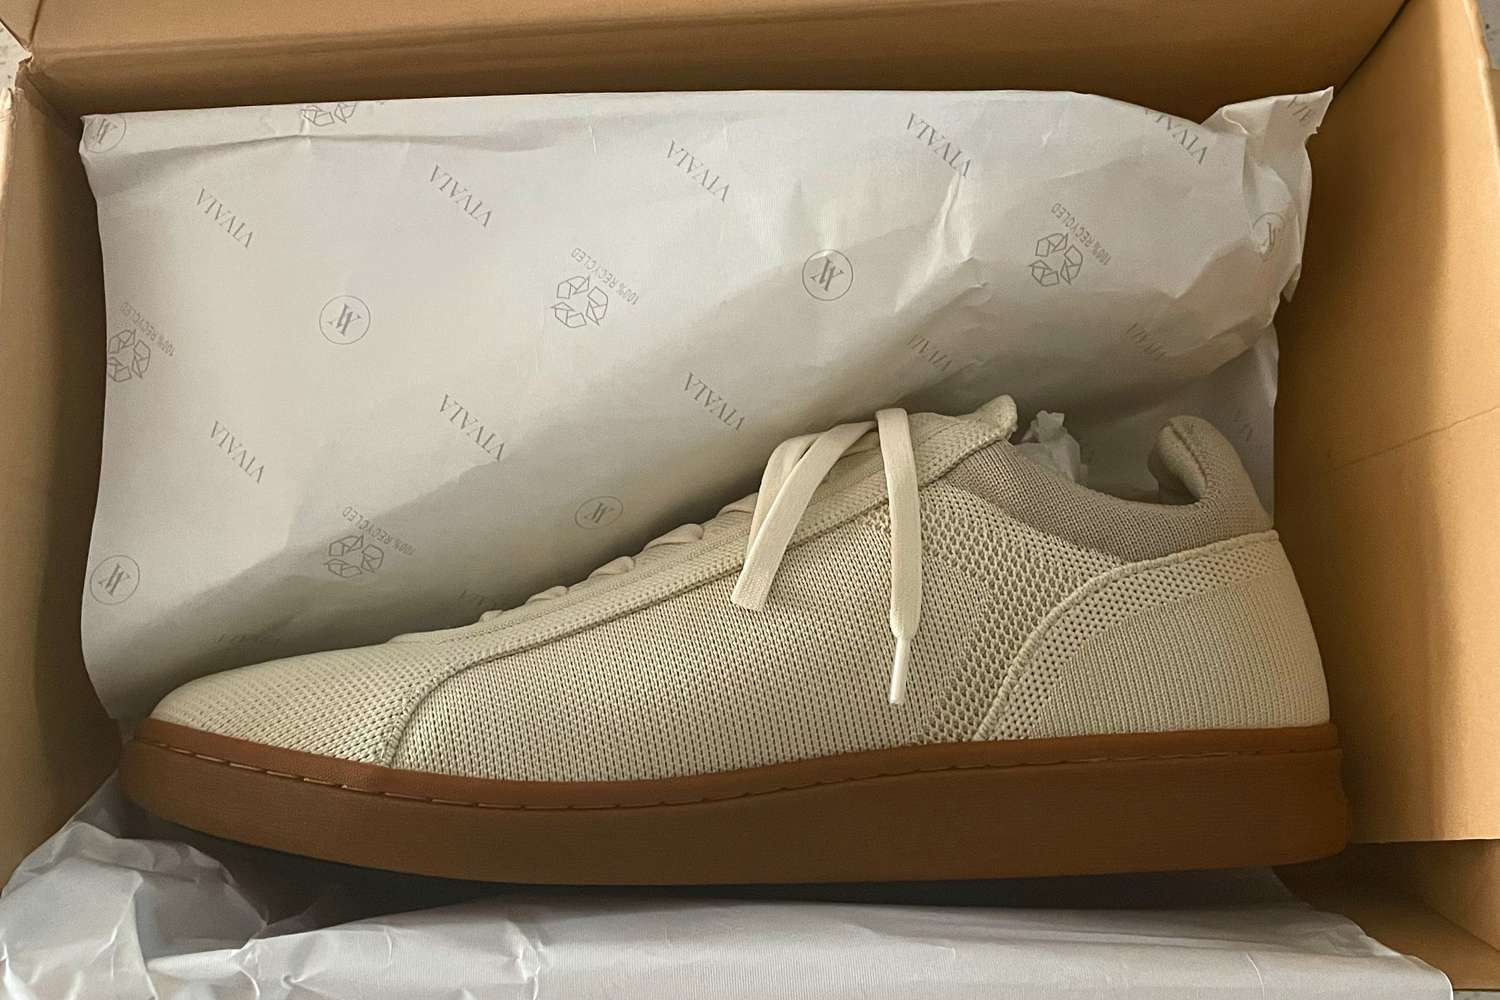 A pair of Vivaia V Prime Unisex Casual Sneakers in the box